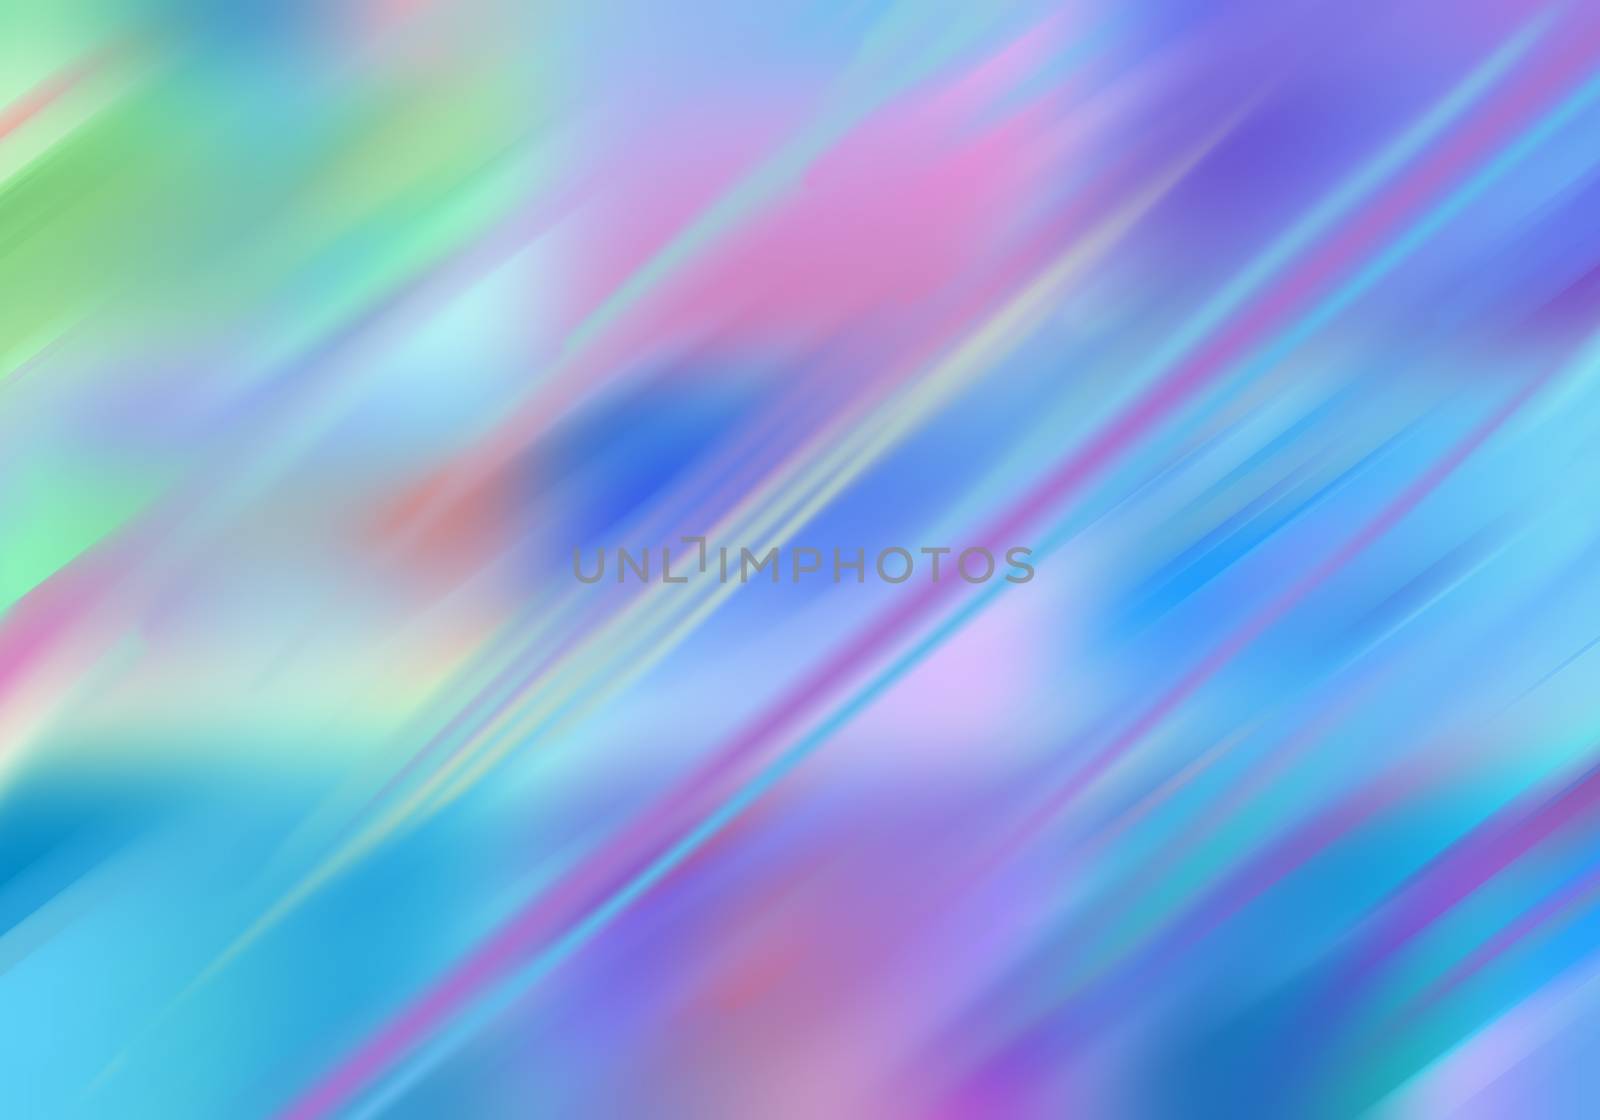 Illustration of Abstract Smooth Colorful Background Modern Design